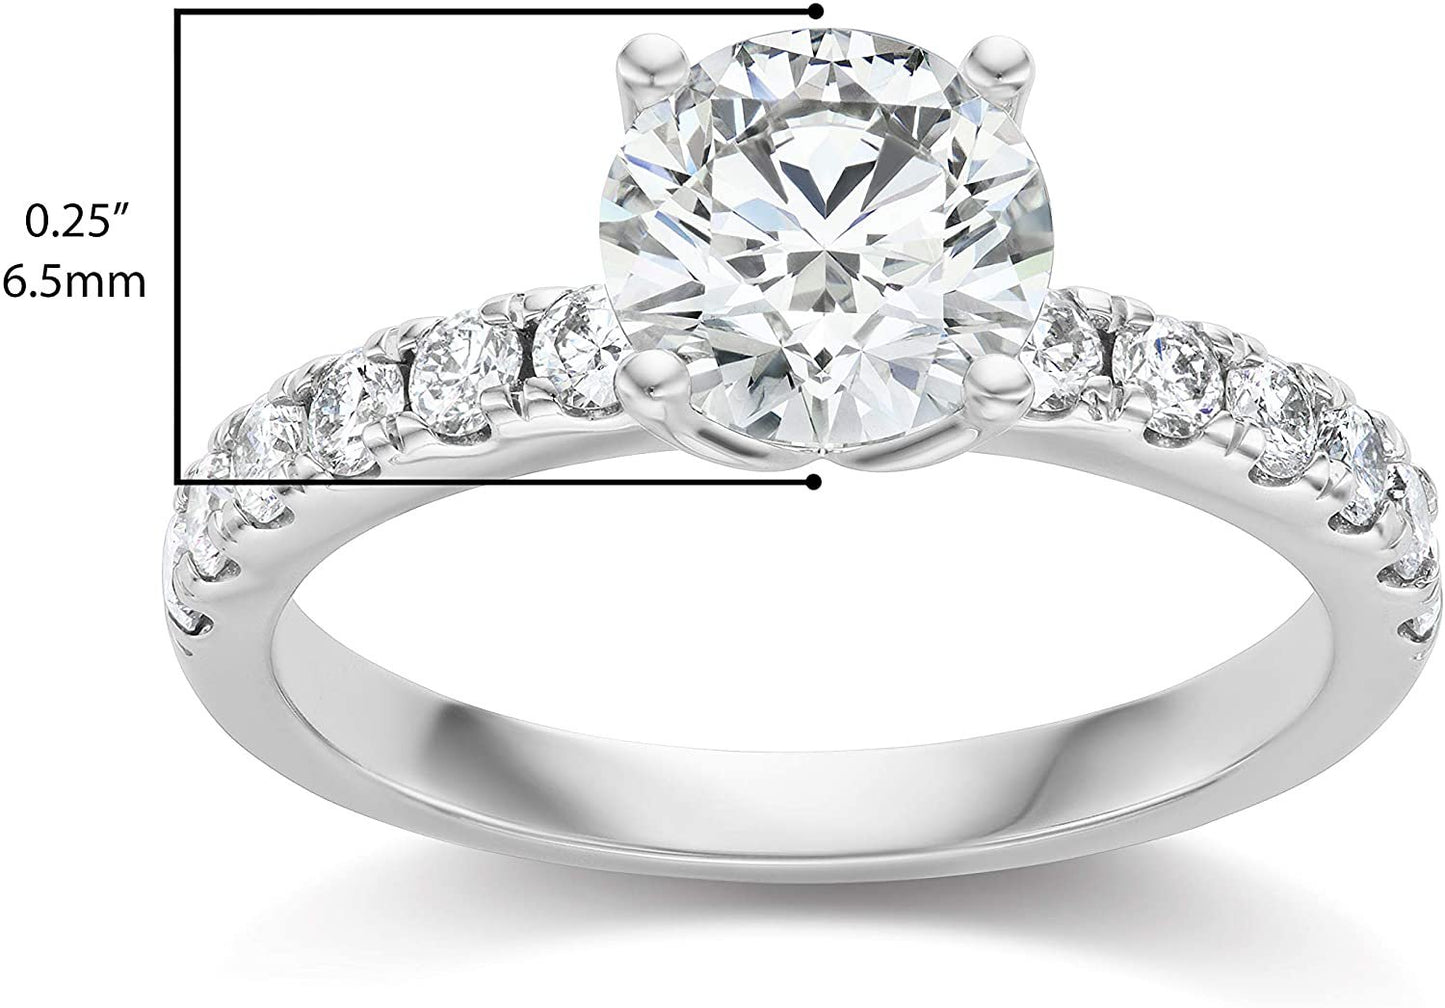 IGI Certified 14K White Gold 1-1/4 to 2-1/2 Cttw Brilliant-Cut Colorless Lab Created Diamond Solitaire Engagement Ring with Pavé-Set Band (Center Stone: E-F Color, VVS1-VVS2 Clarity)